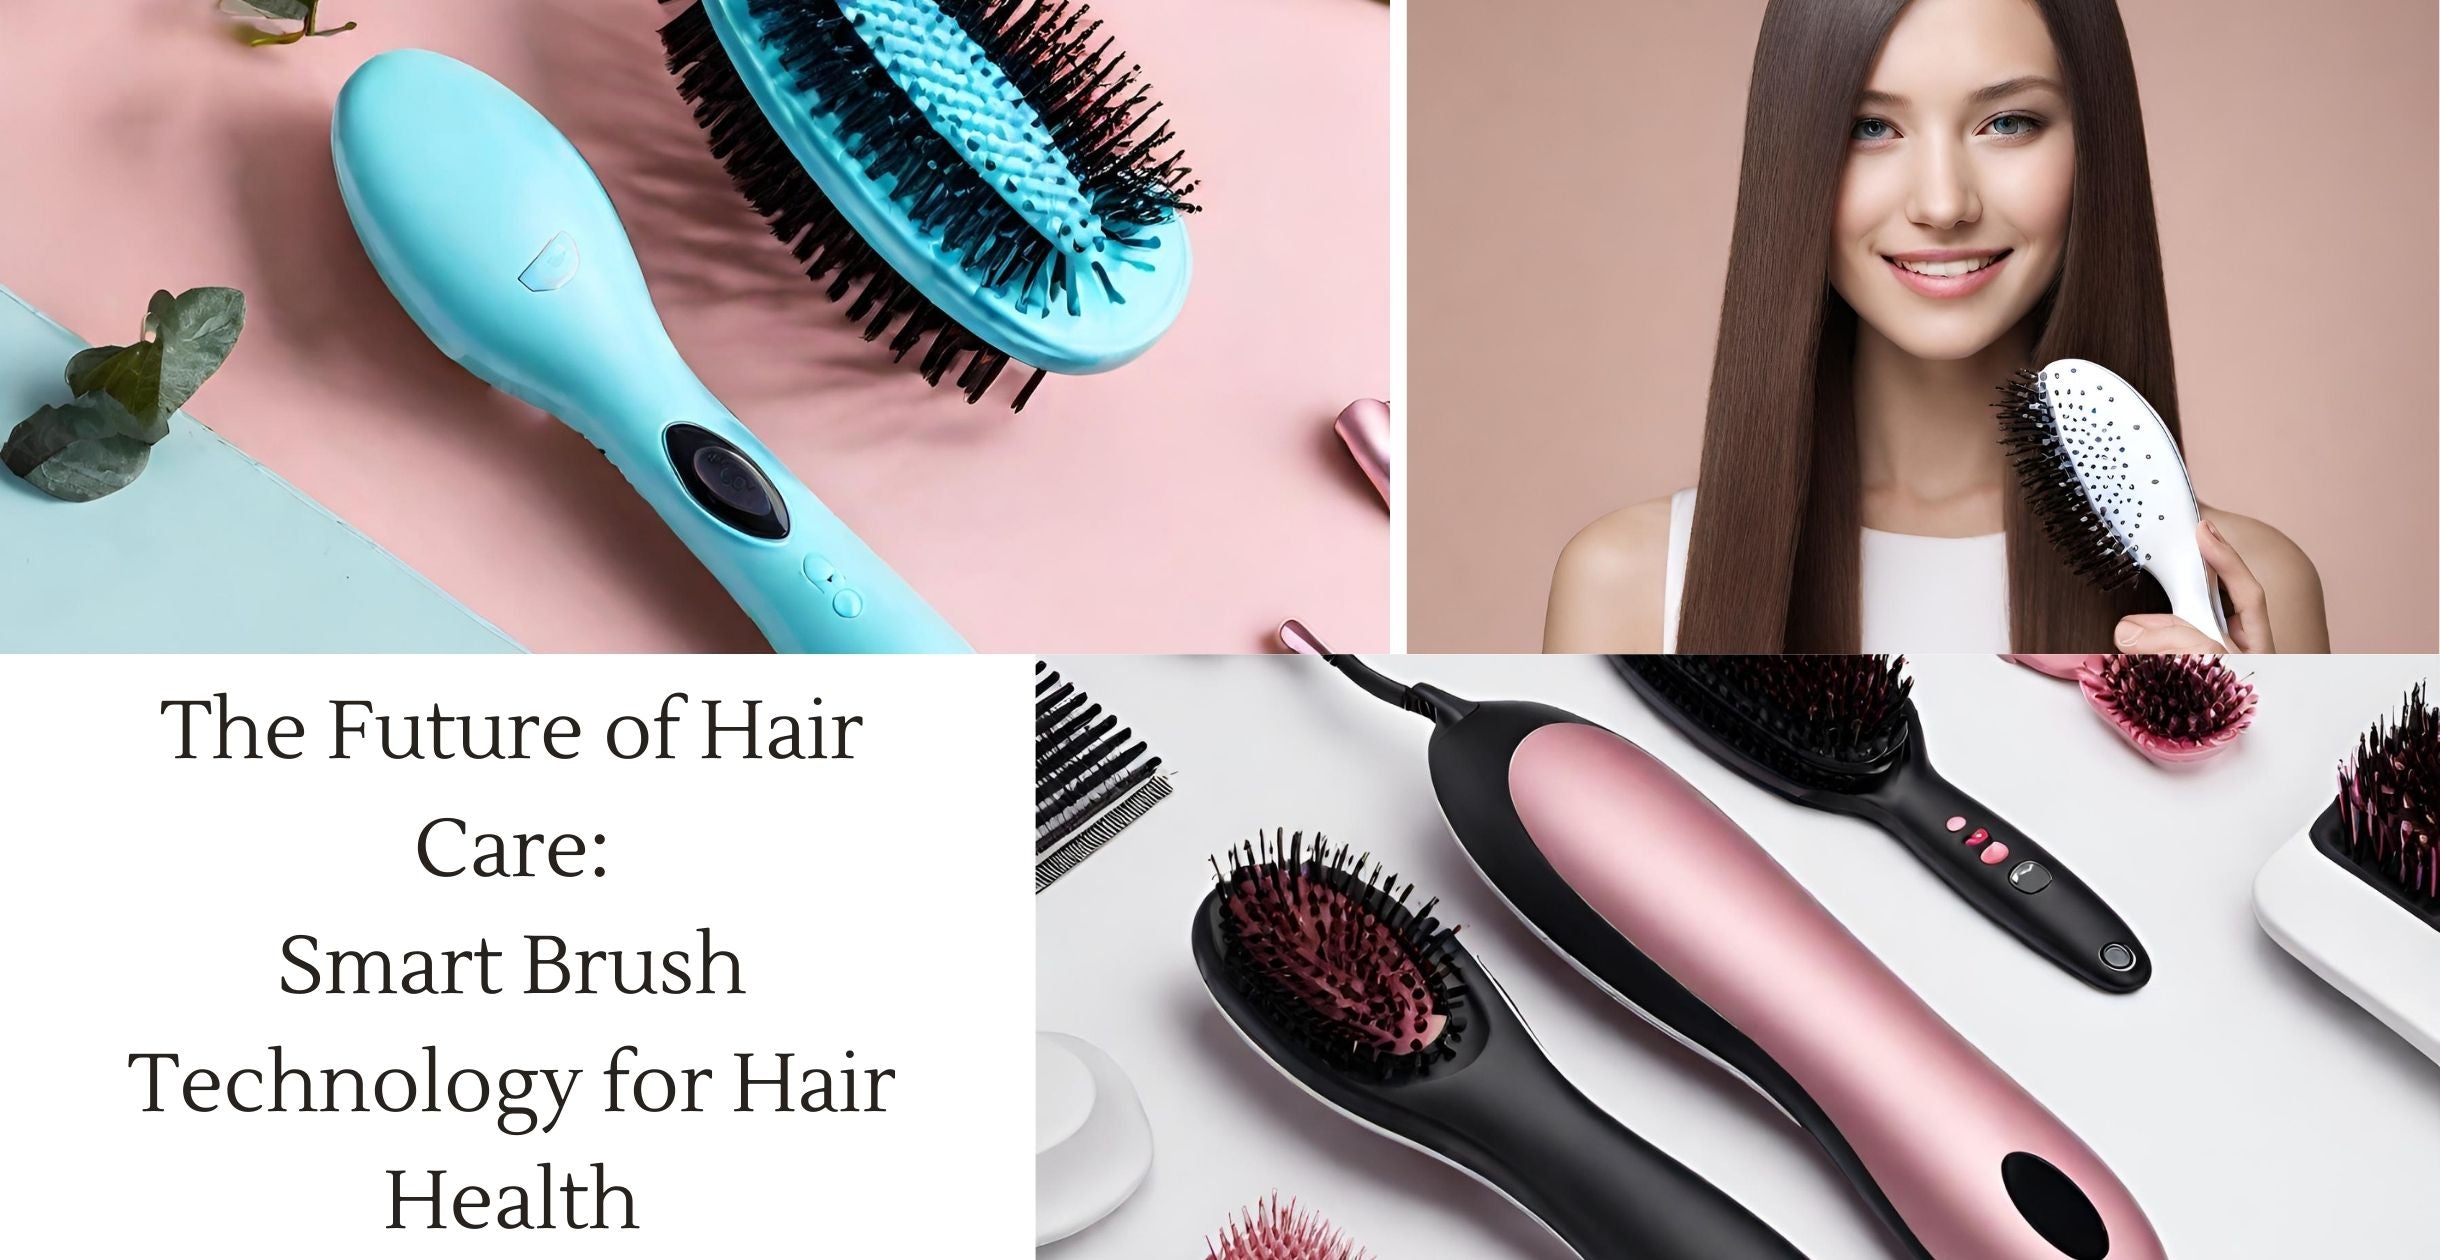 The Future of Hair Care: Smart Brush Technology for Hair Health